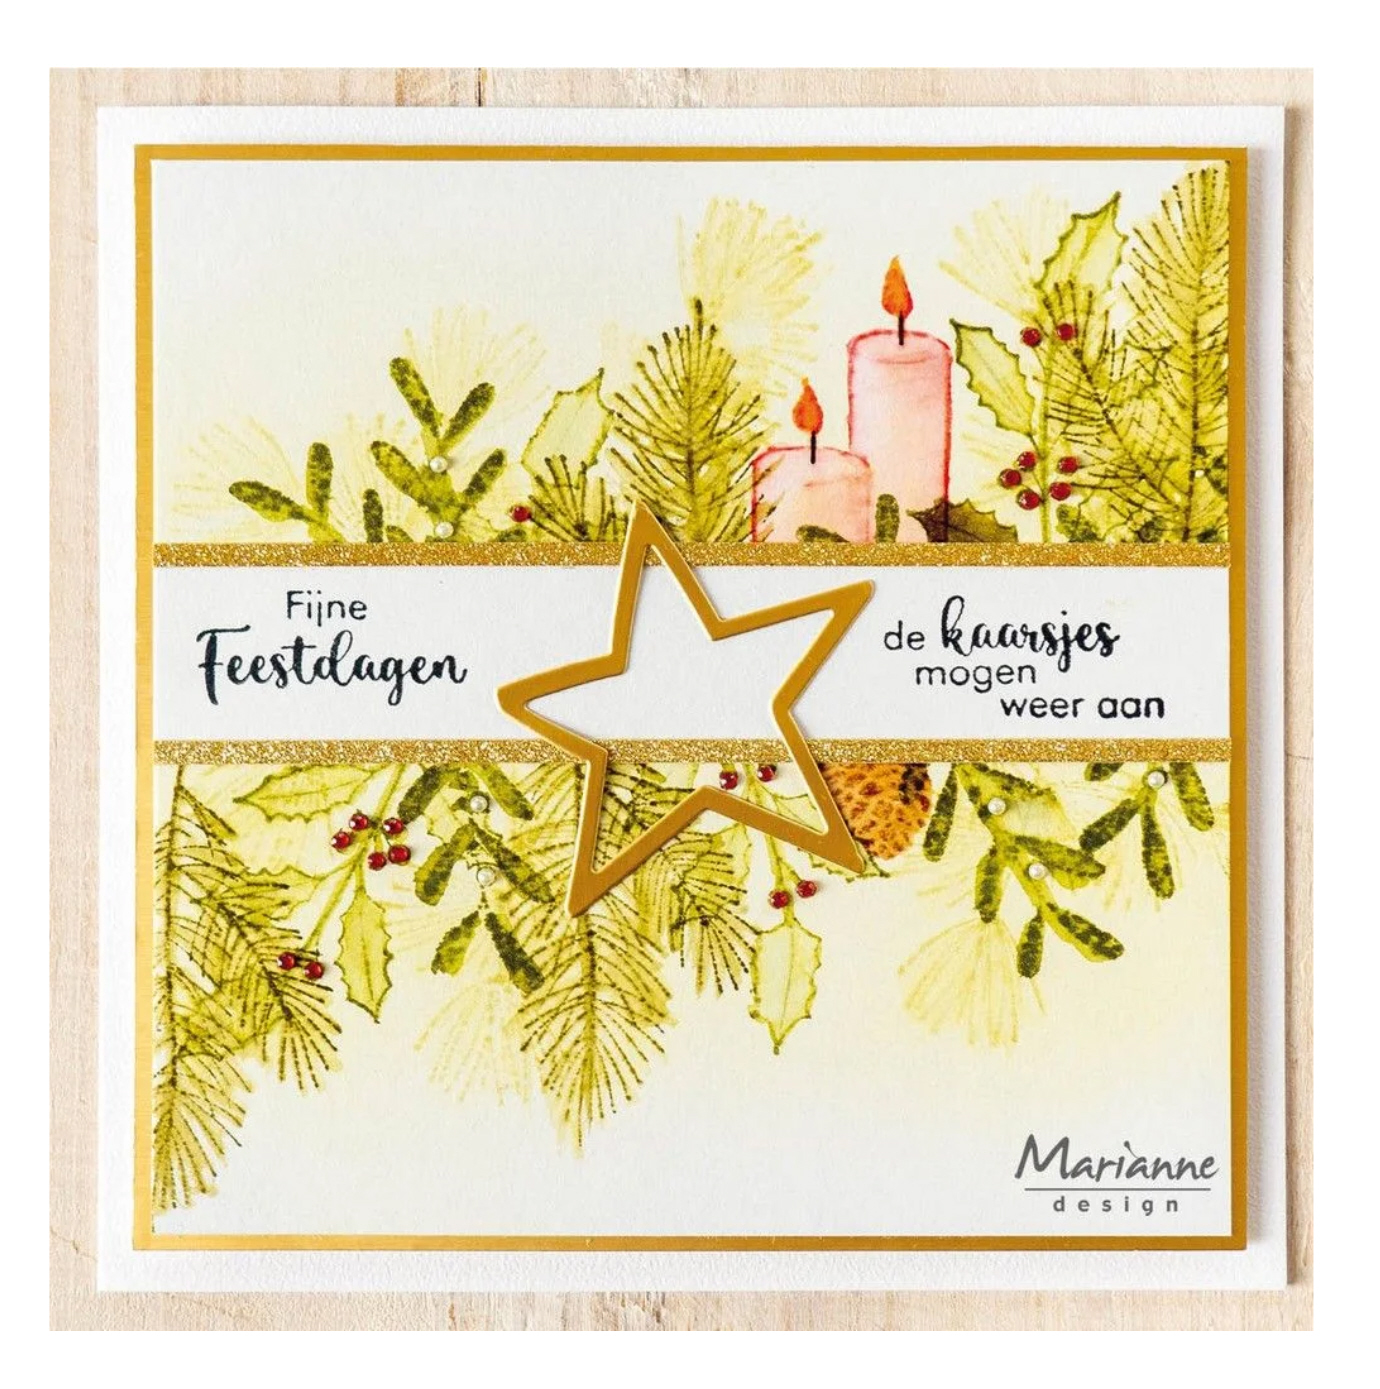 Marianne Design Silikonstempel Silhouette Art Candles 24x40mm / 9x80mm